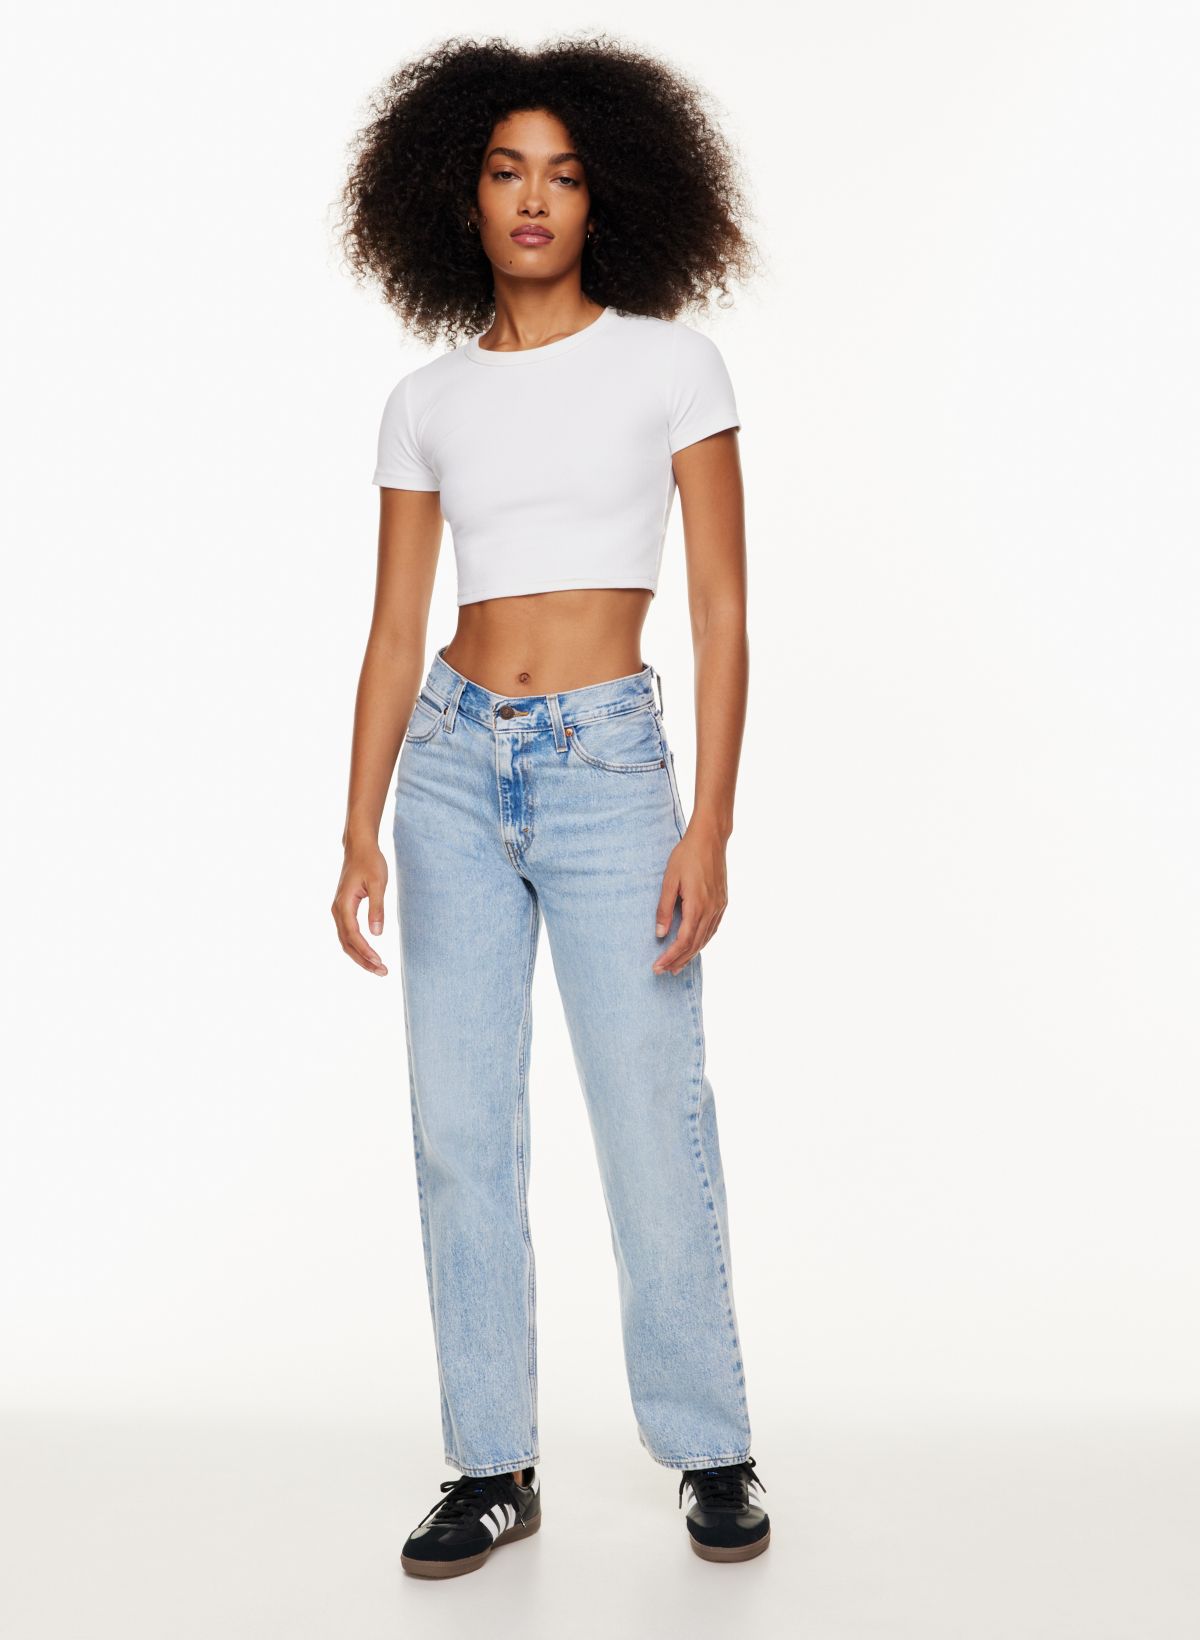 Extremely important complicated Engage Levi's DAD JEAN | Aritzia US